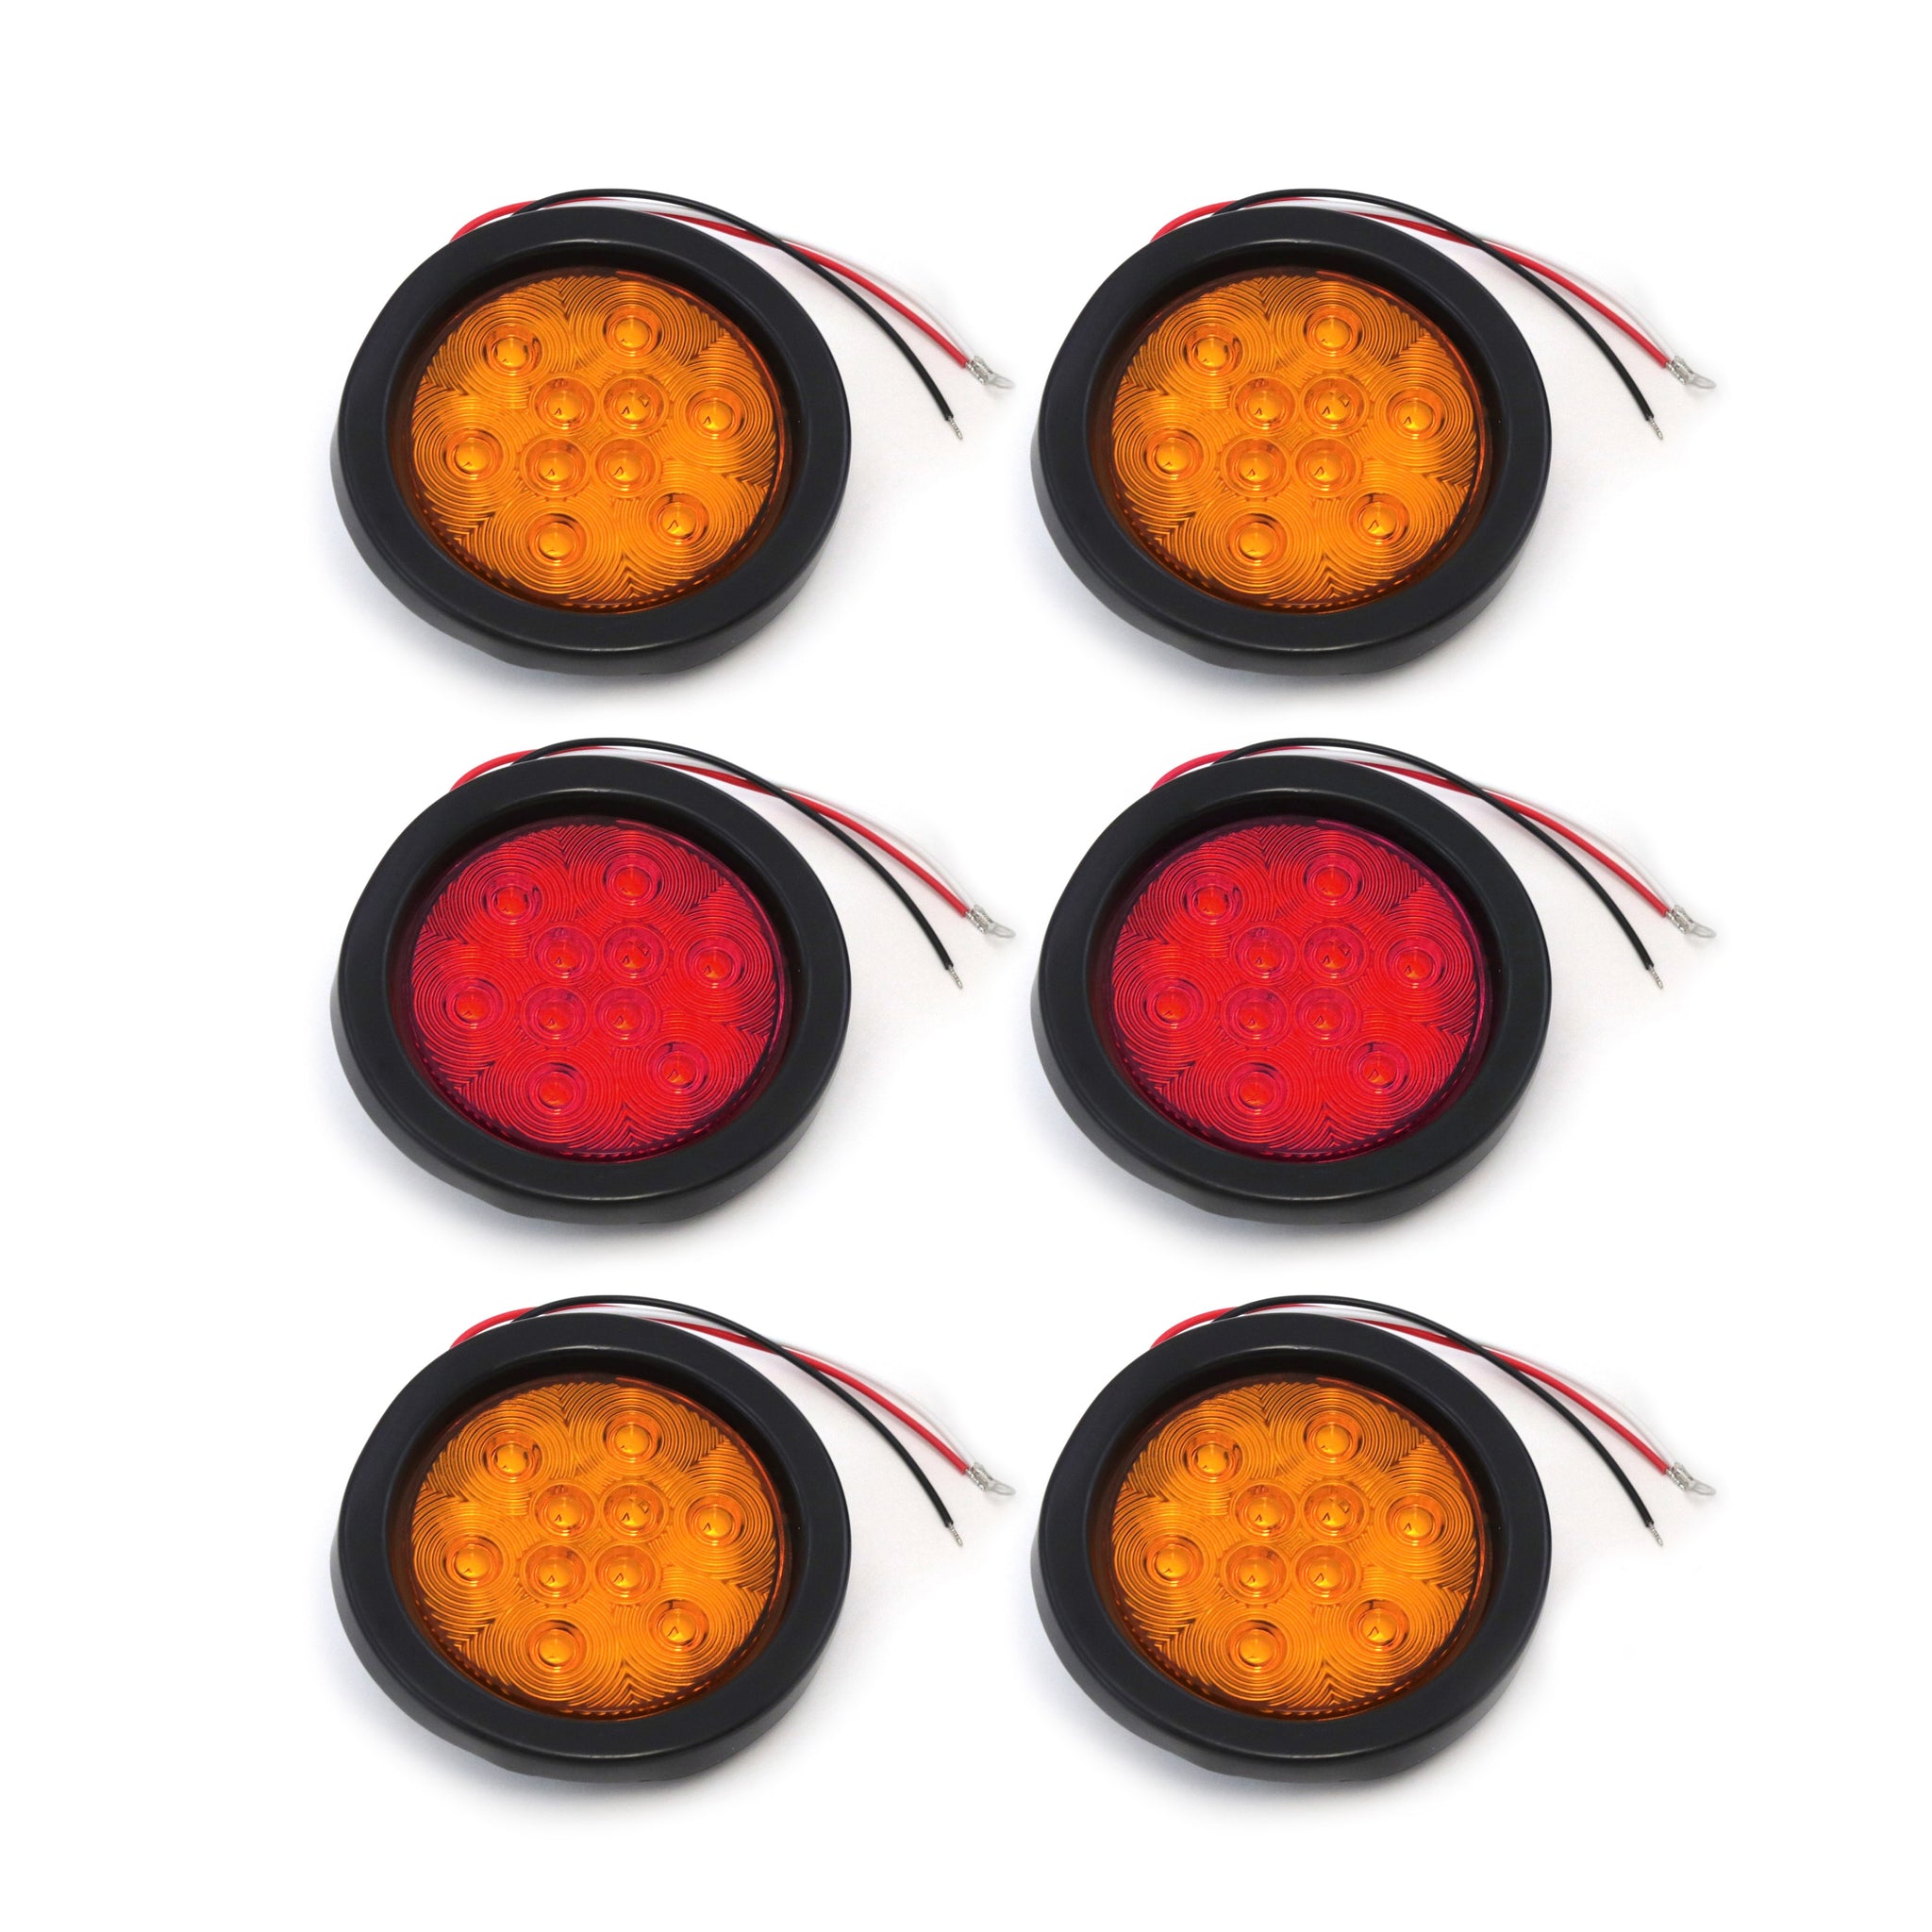 4 Inches Round 2 Red & 4 Amber 10 LED Stop Turn Tail Light Brake Flush Truck Trailer